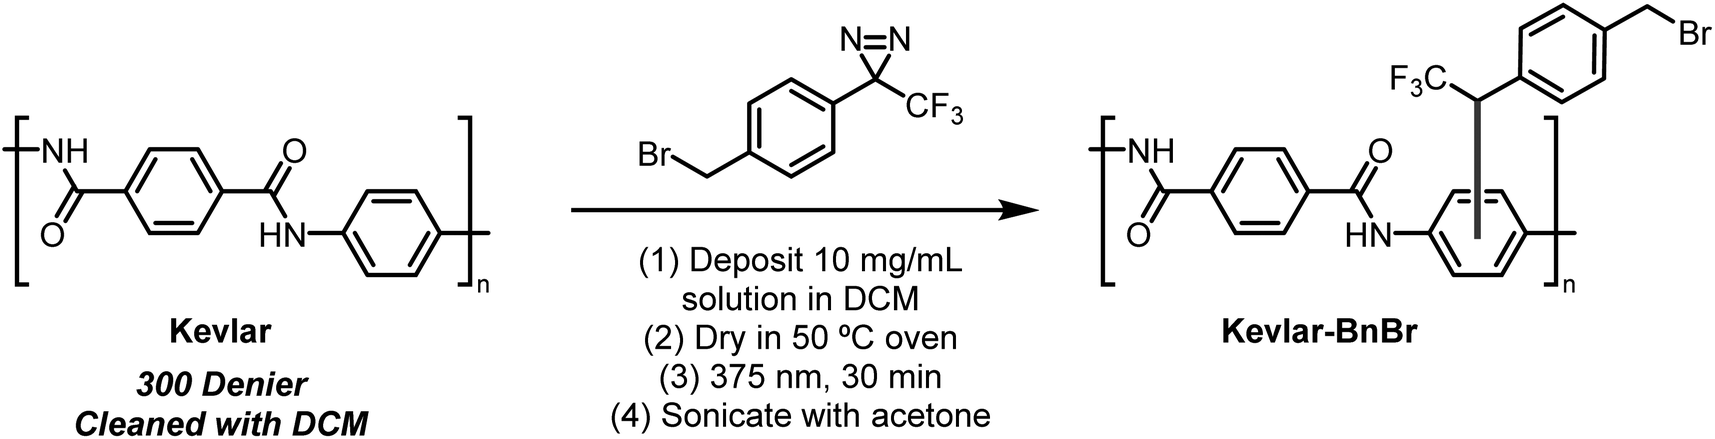 Bifunctional diazirine reagent for covalent dyeing of Kevlar and